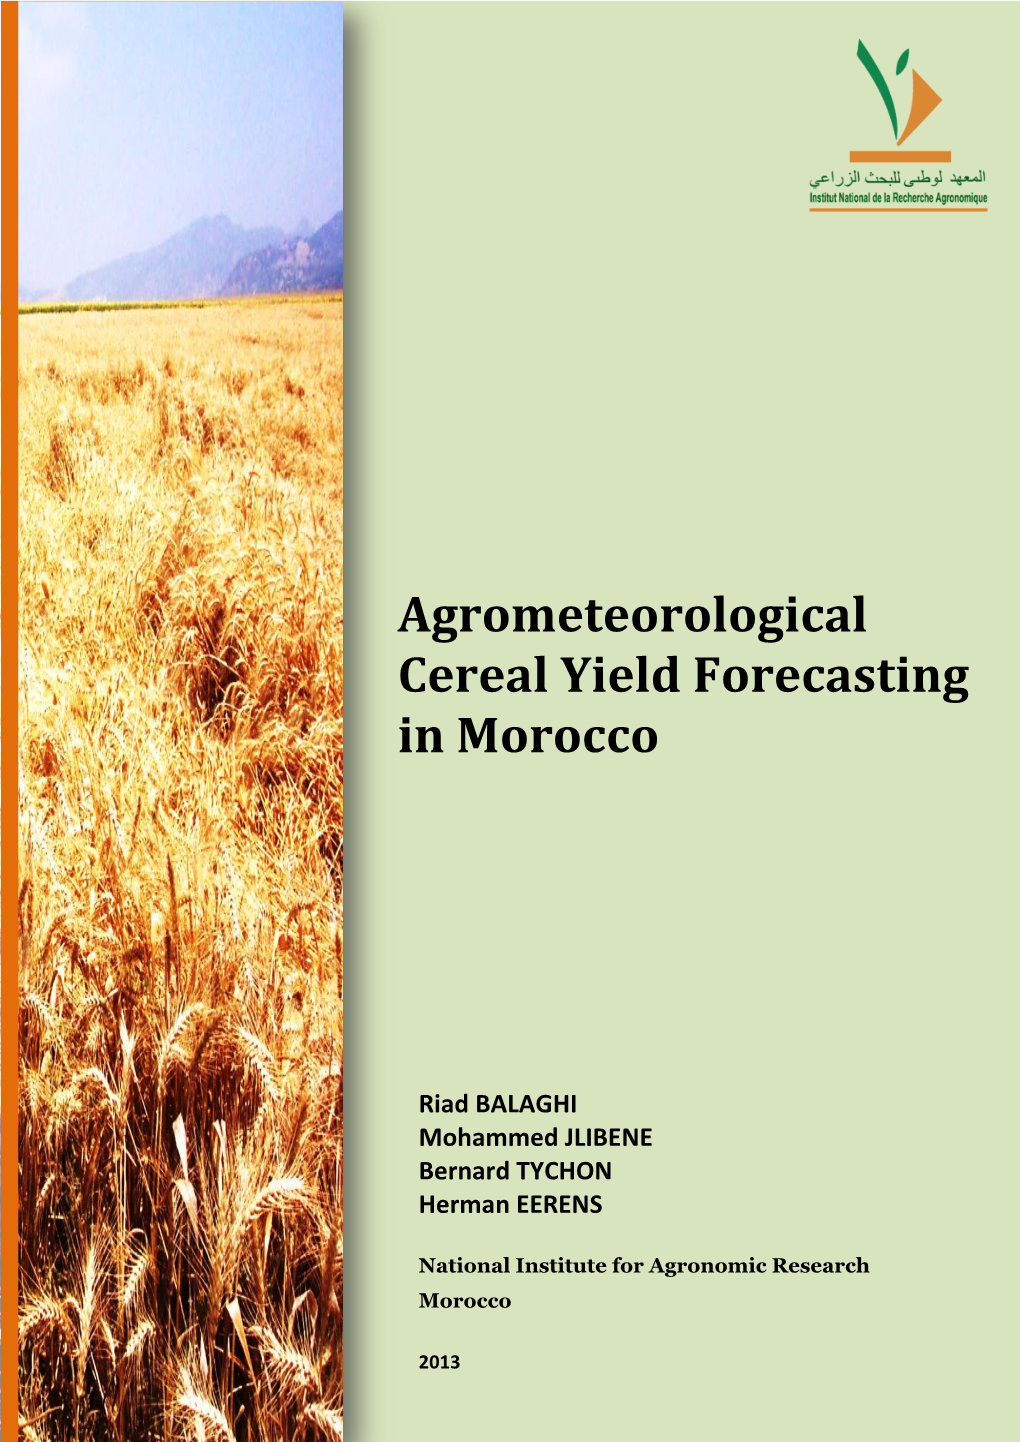 Agrometeorological Cereal Yield Forecasting in Morocco